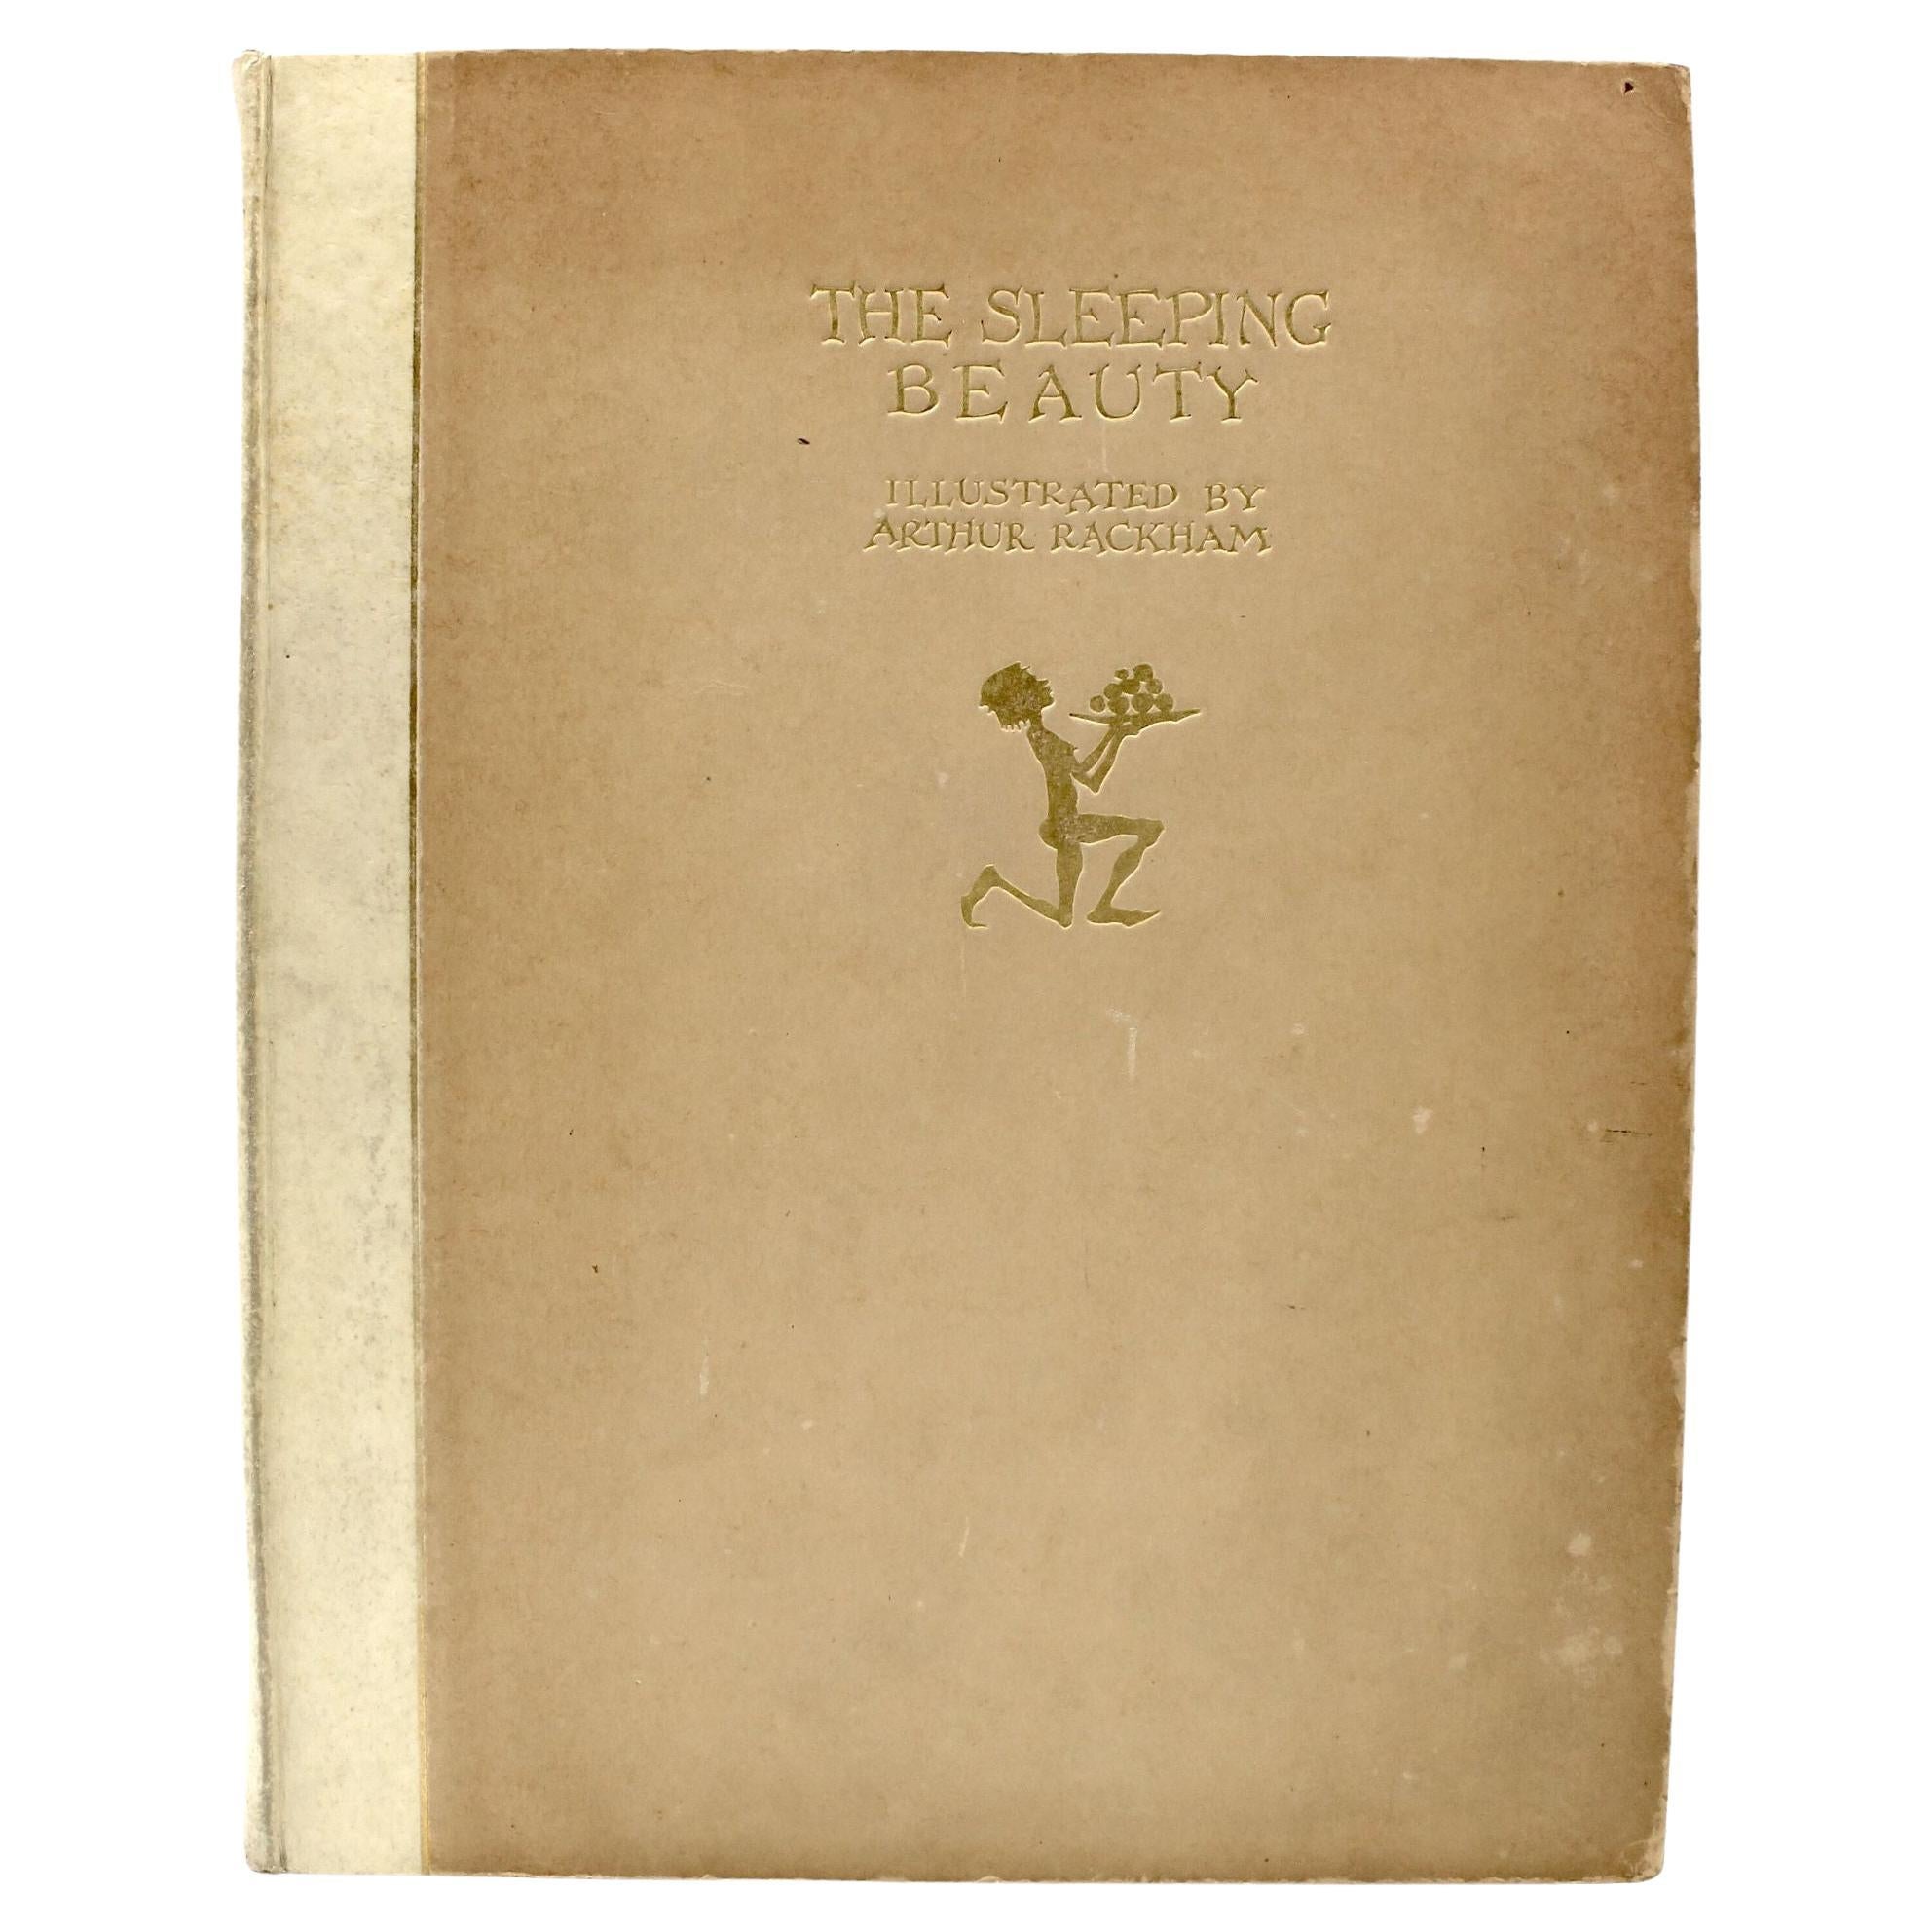 Evans, C.S. (editor). Rackham, Arthur (illustrator). The Sleeping Beauty. London and Philadelphia: William Heinemann & J.B. Lippincott Co., 1920. First Edition, Limited Edition. Signed by Rackham. 

This is a desirable, limited edition printing of